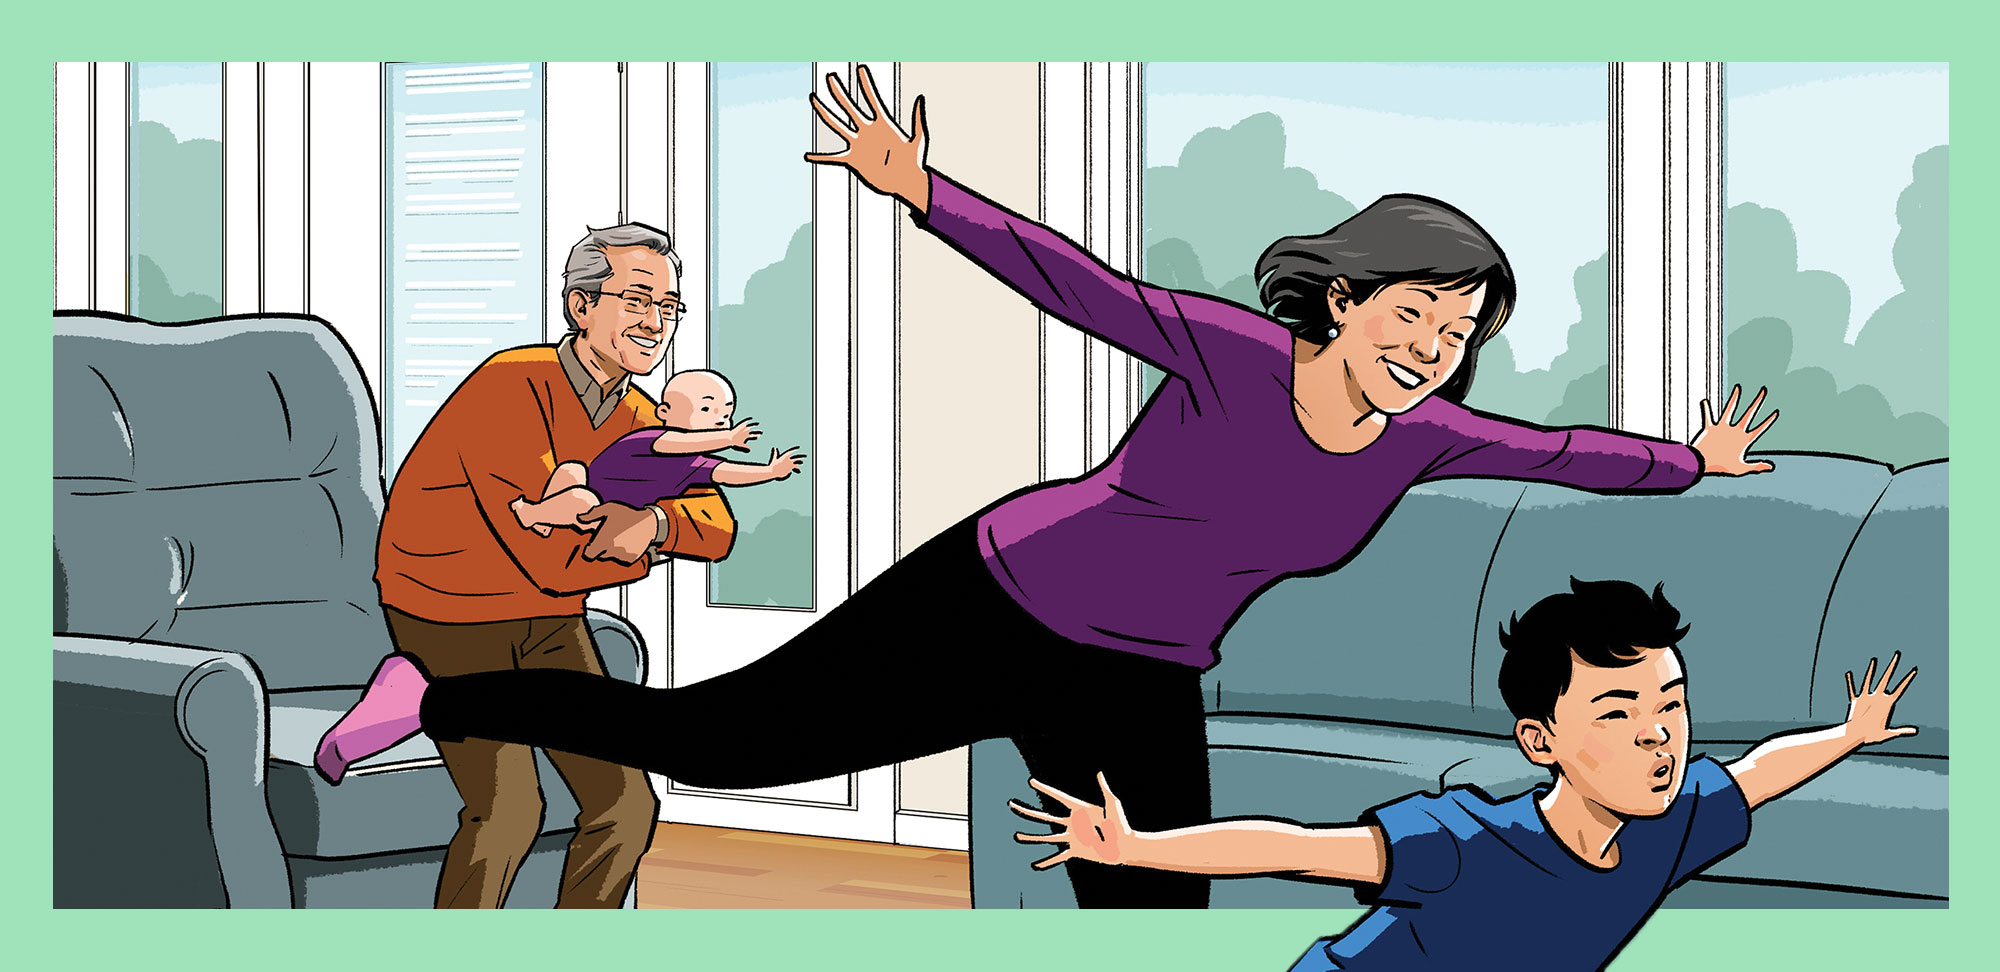 Illustration of grandparents actively participating with their grandchildren